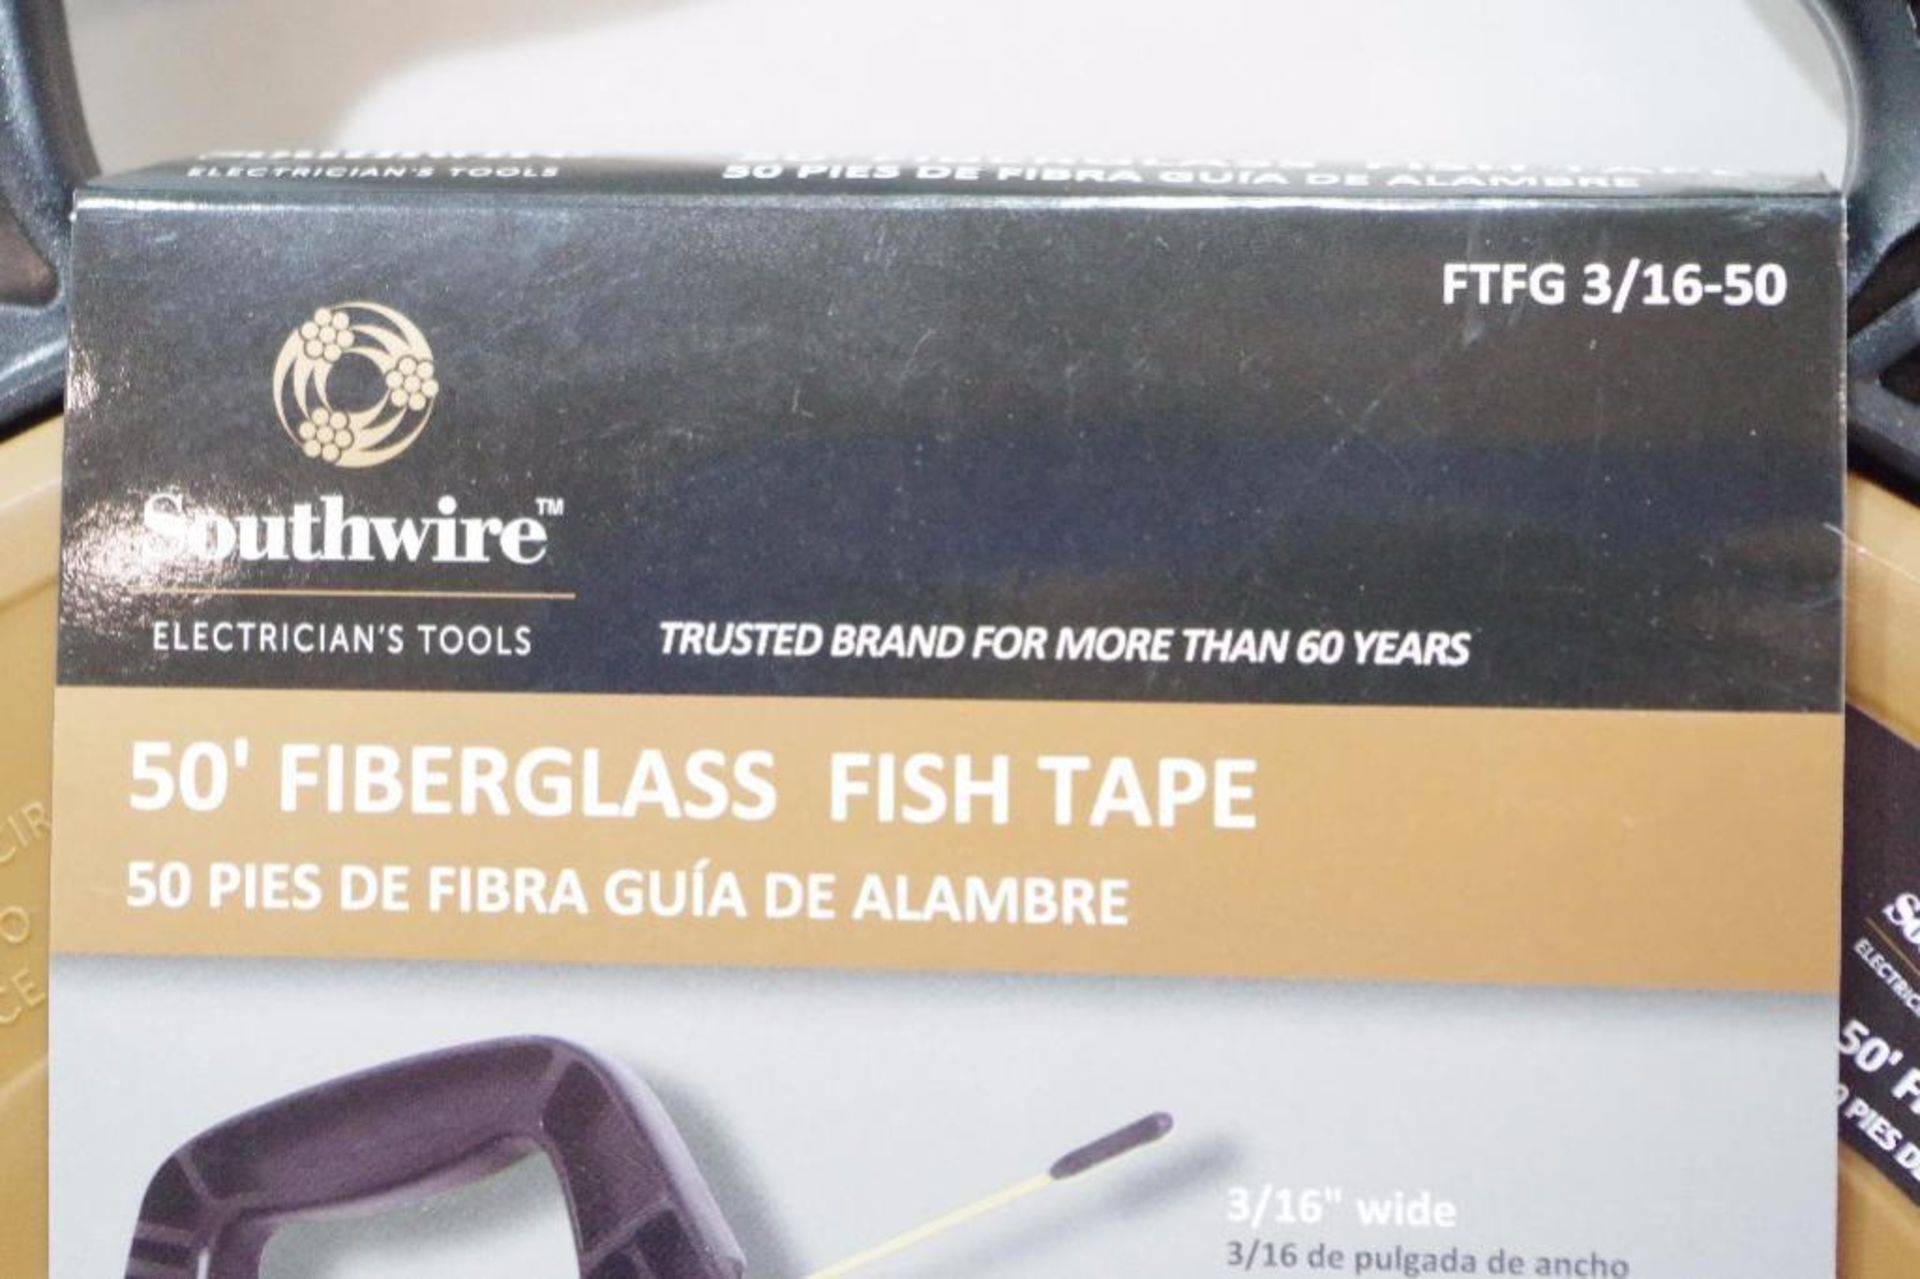 NEW SOUTHWIRE 50' Fiberglass Fish Tape, 3/16" Wide (M/N FTFG 3/16-50) - Image 2 of 3